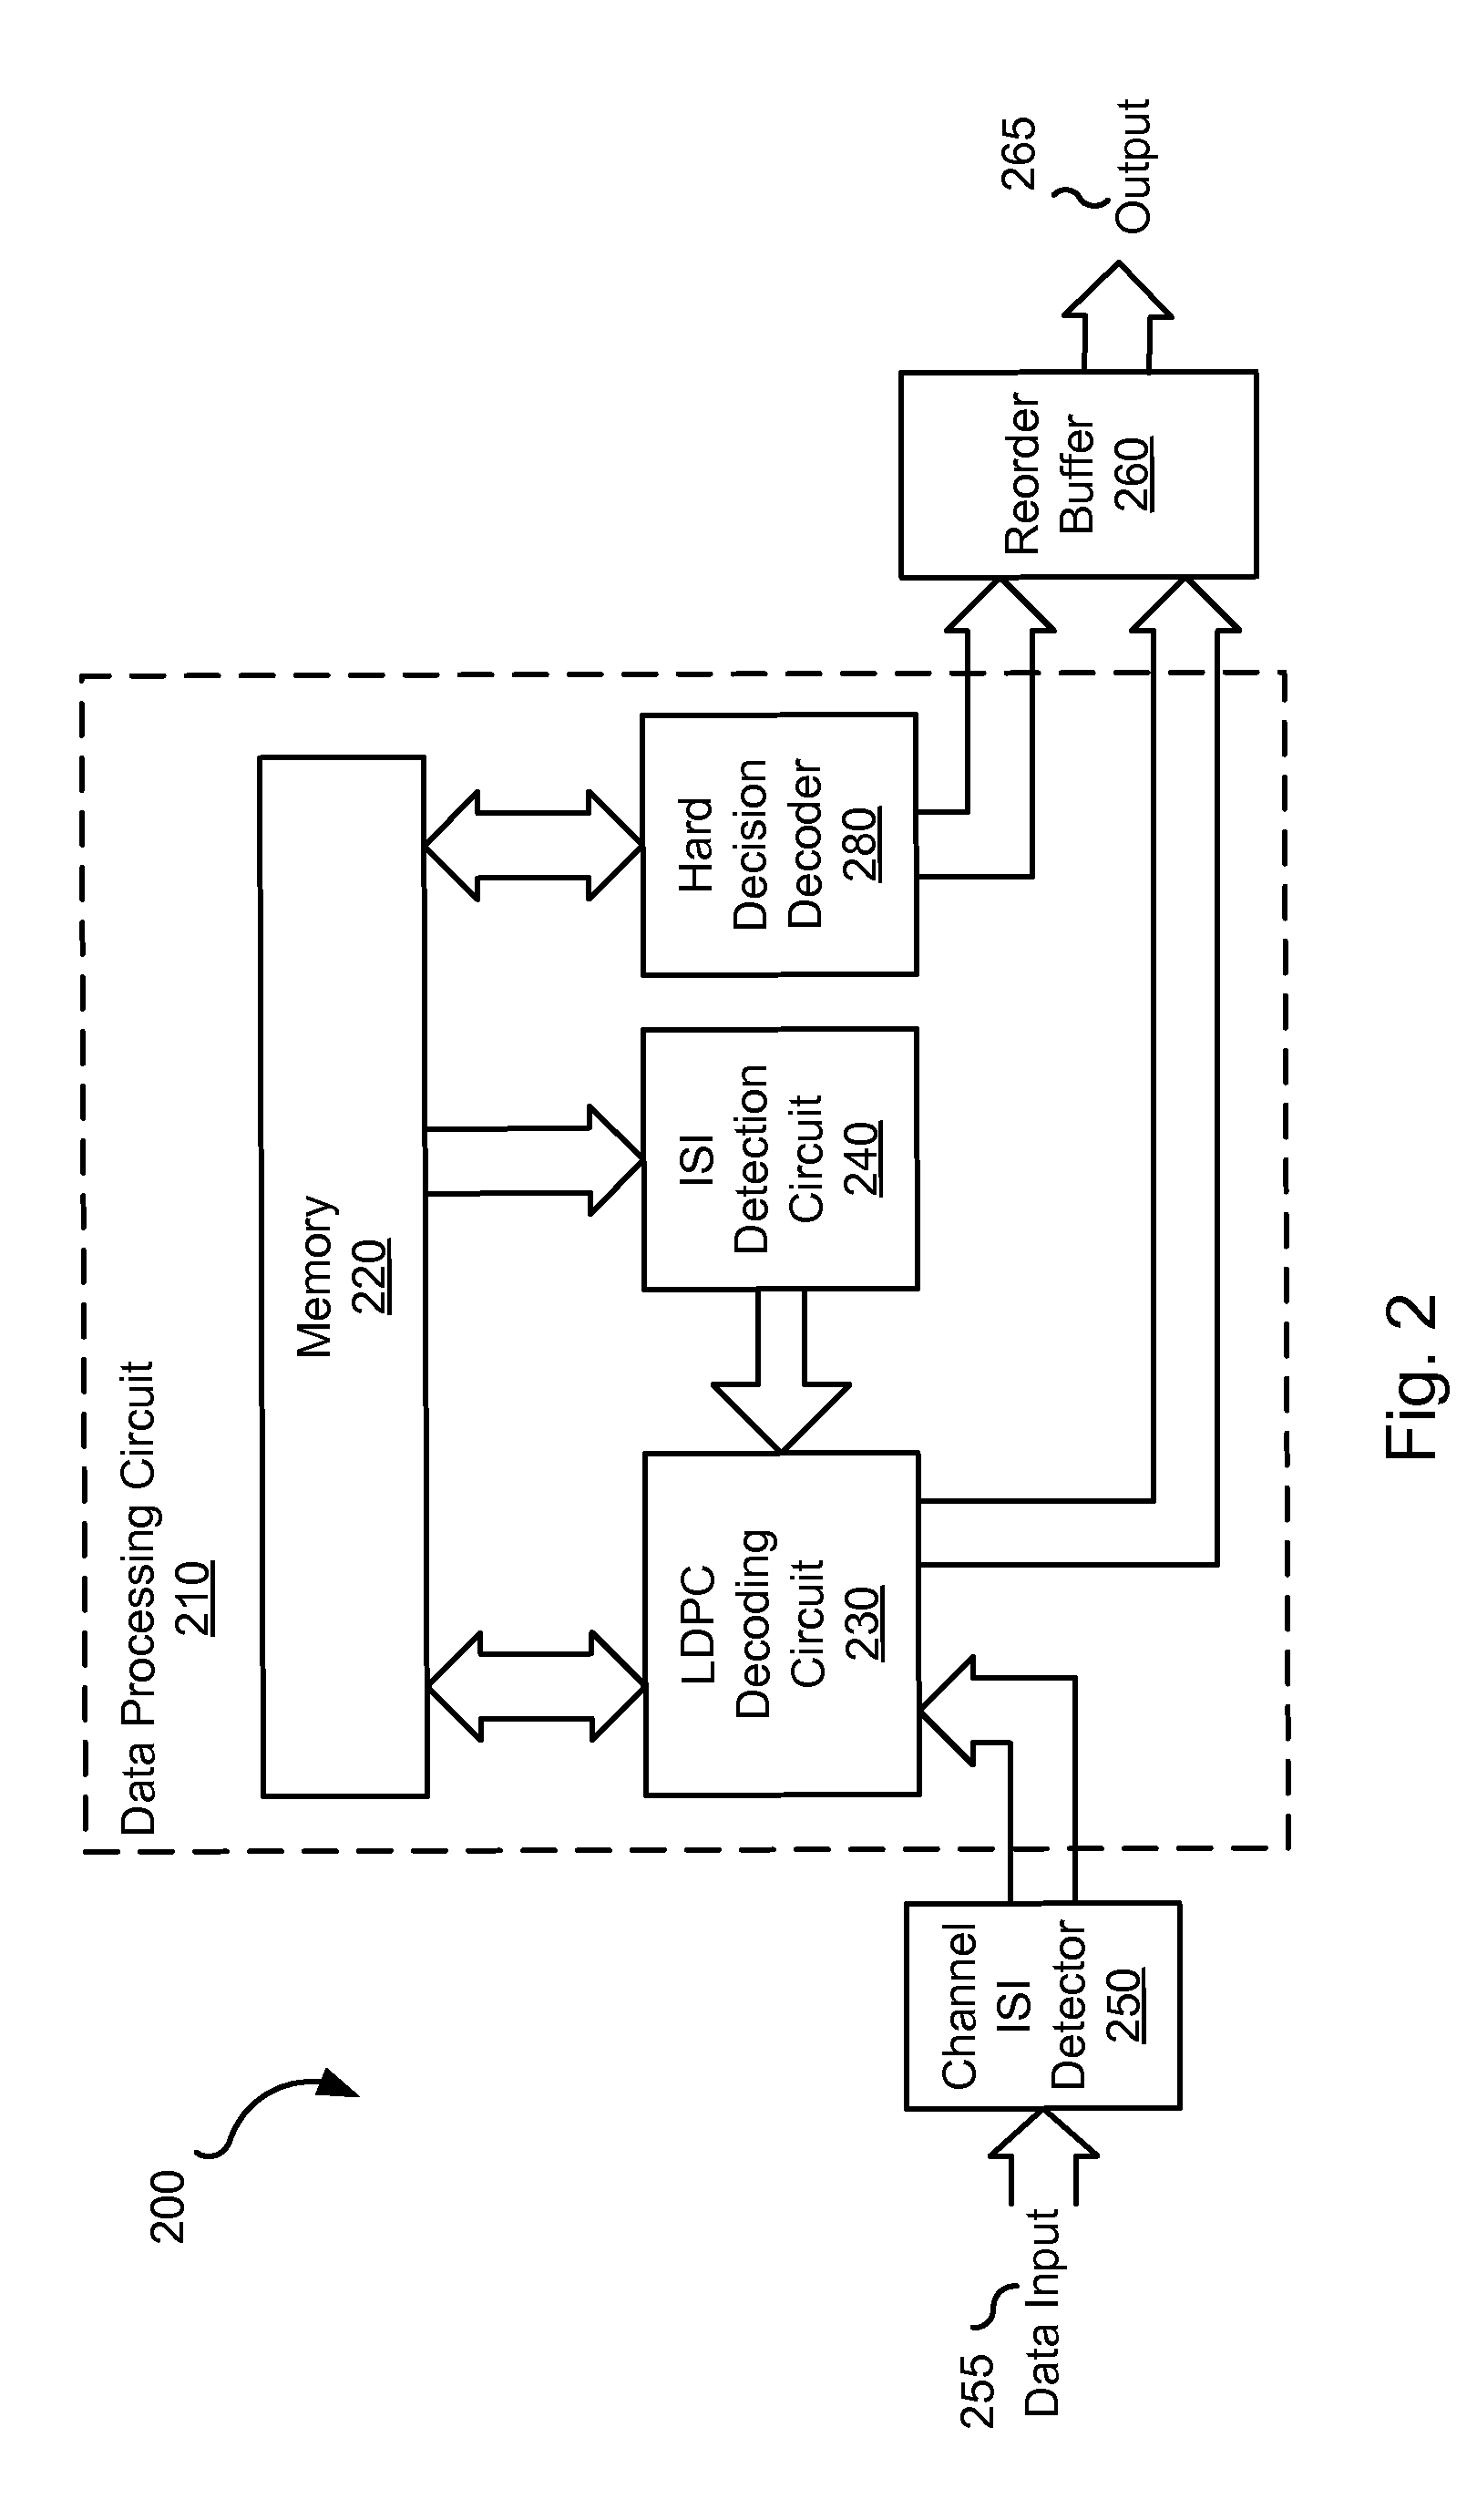 Systems and Methods for Hard Decision Assisted Decoding